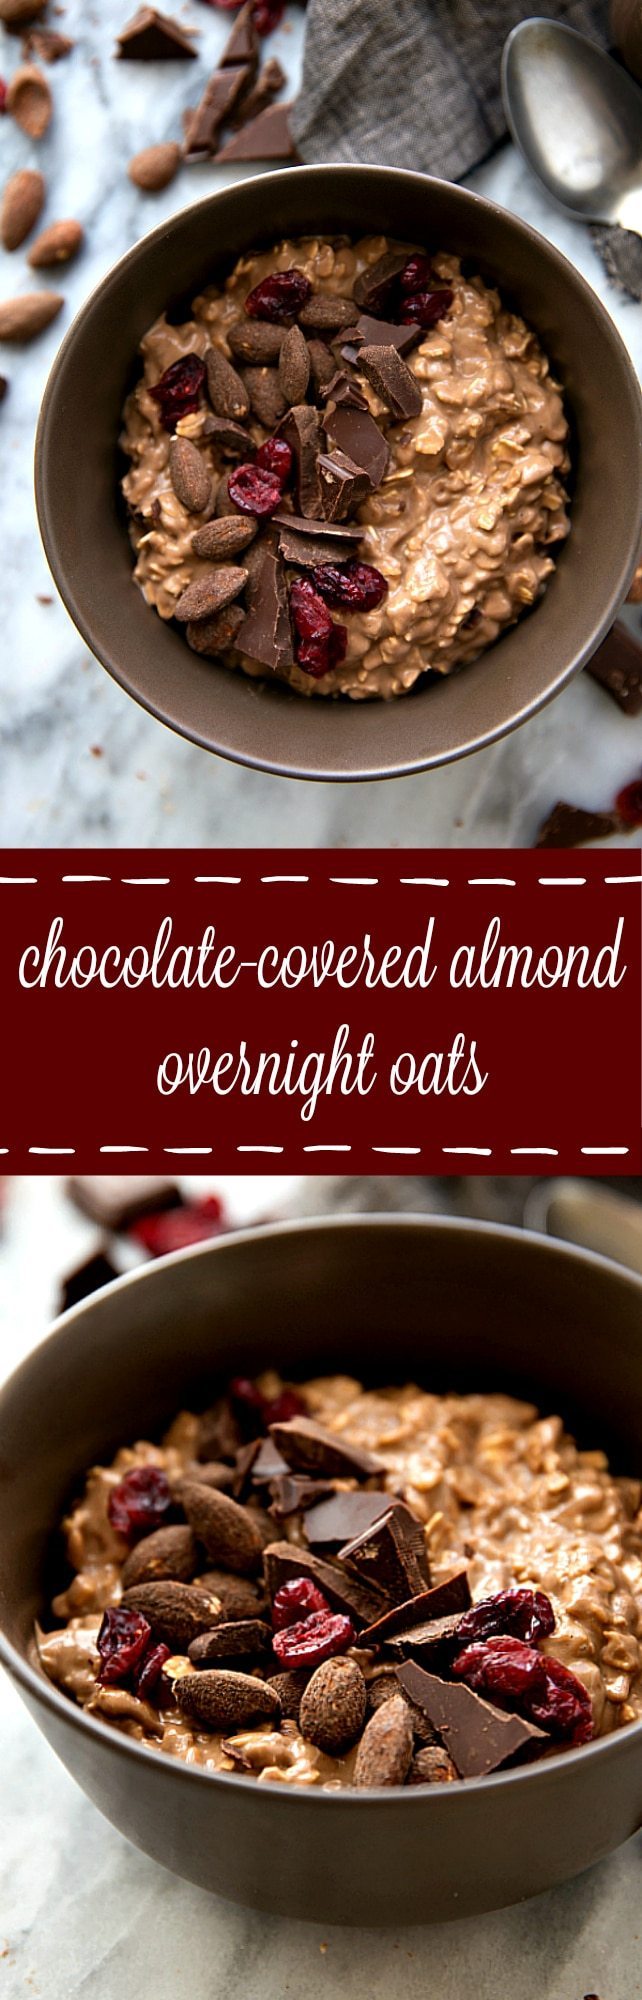 Overnight oatmeal flavored to taste like chocolate-covered almonds. Add in some dried cranberries and enjoy a delicious, quick, & easy seasonal breakfast!